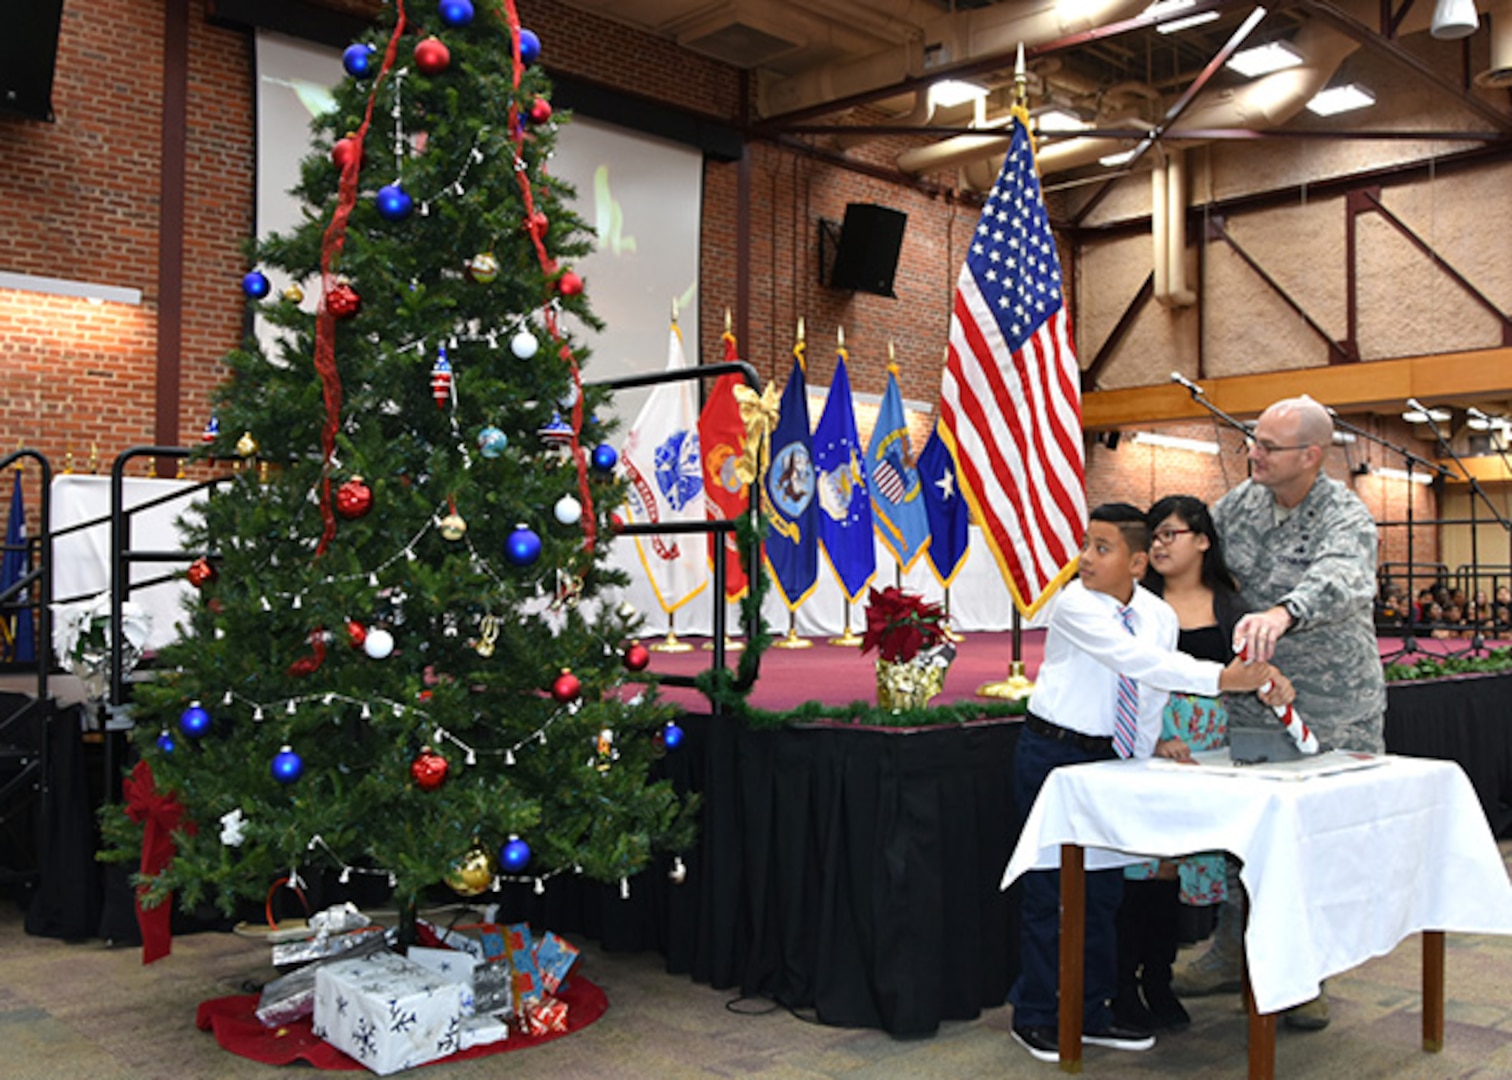 Bensley Elementary School 5th graders, Angela Bernardina Marinex and Andersson Revelo Castro, along with Defense Logistics Agency Aviation Commander Air Force Brig. Gen. Allan Day throw the switch to light the tree during the annual Tree Lighting Ceremony Dec. 10, 2015 in the Frank B. Lotts Conference Center on Defense Supply Center Richmond, Virginia. 